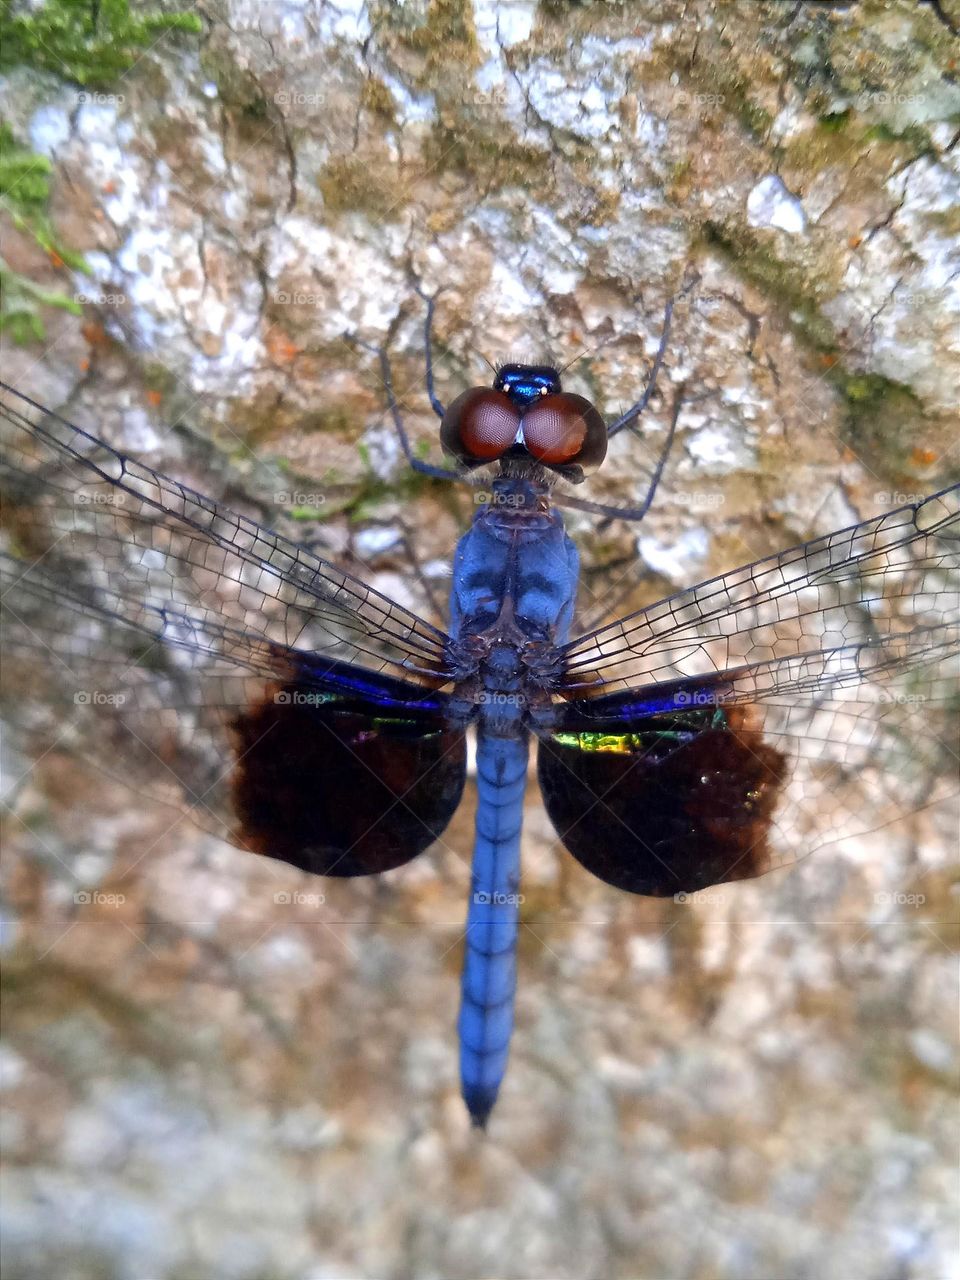 Blue dragonfly on the tree trunk.